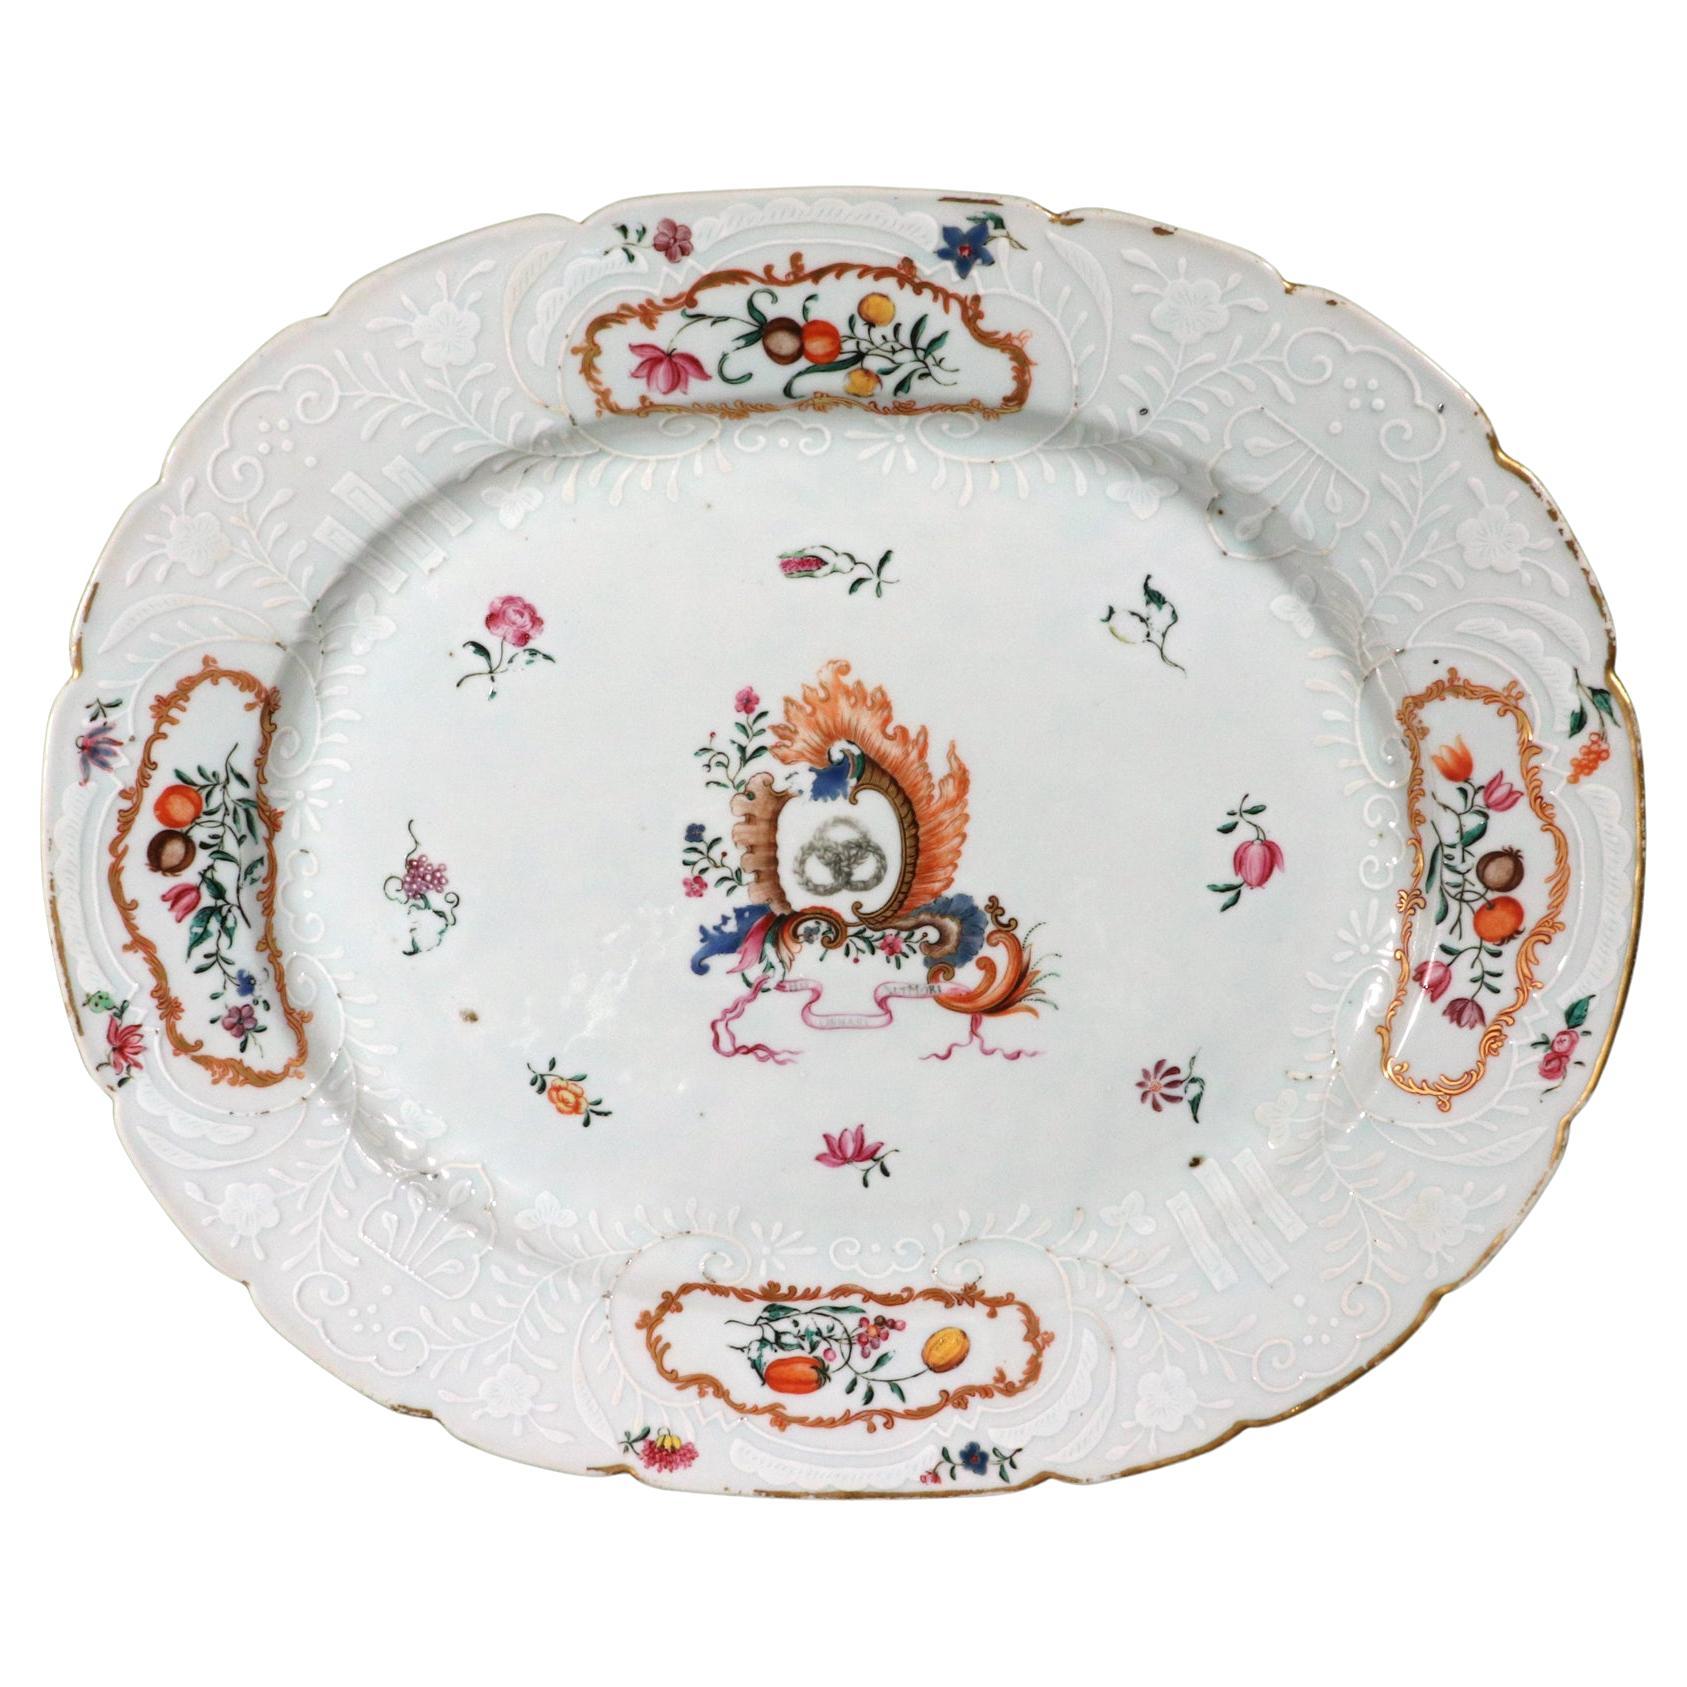 Chinese Export Porcelain Armorial Dish with European Coat of Arms